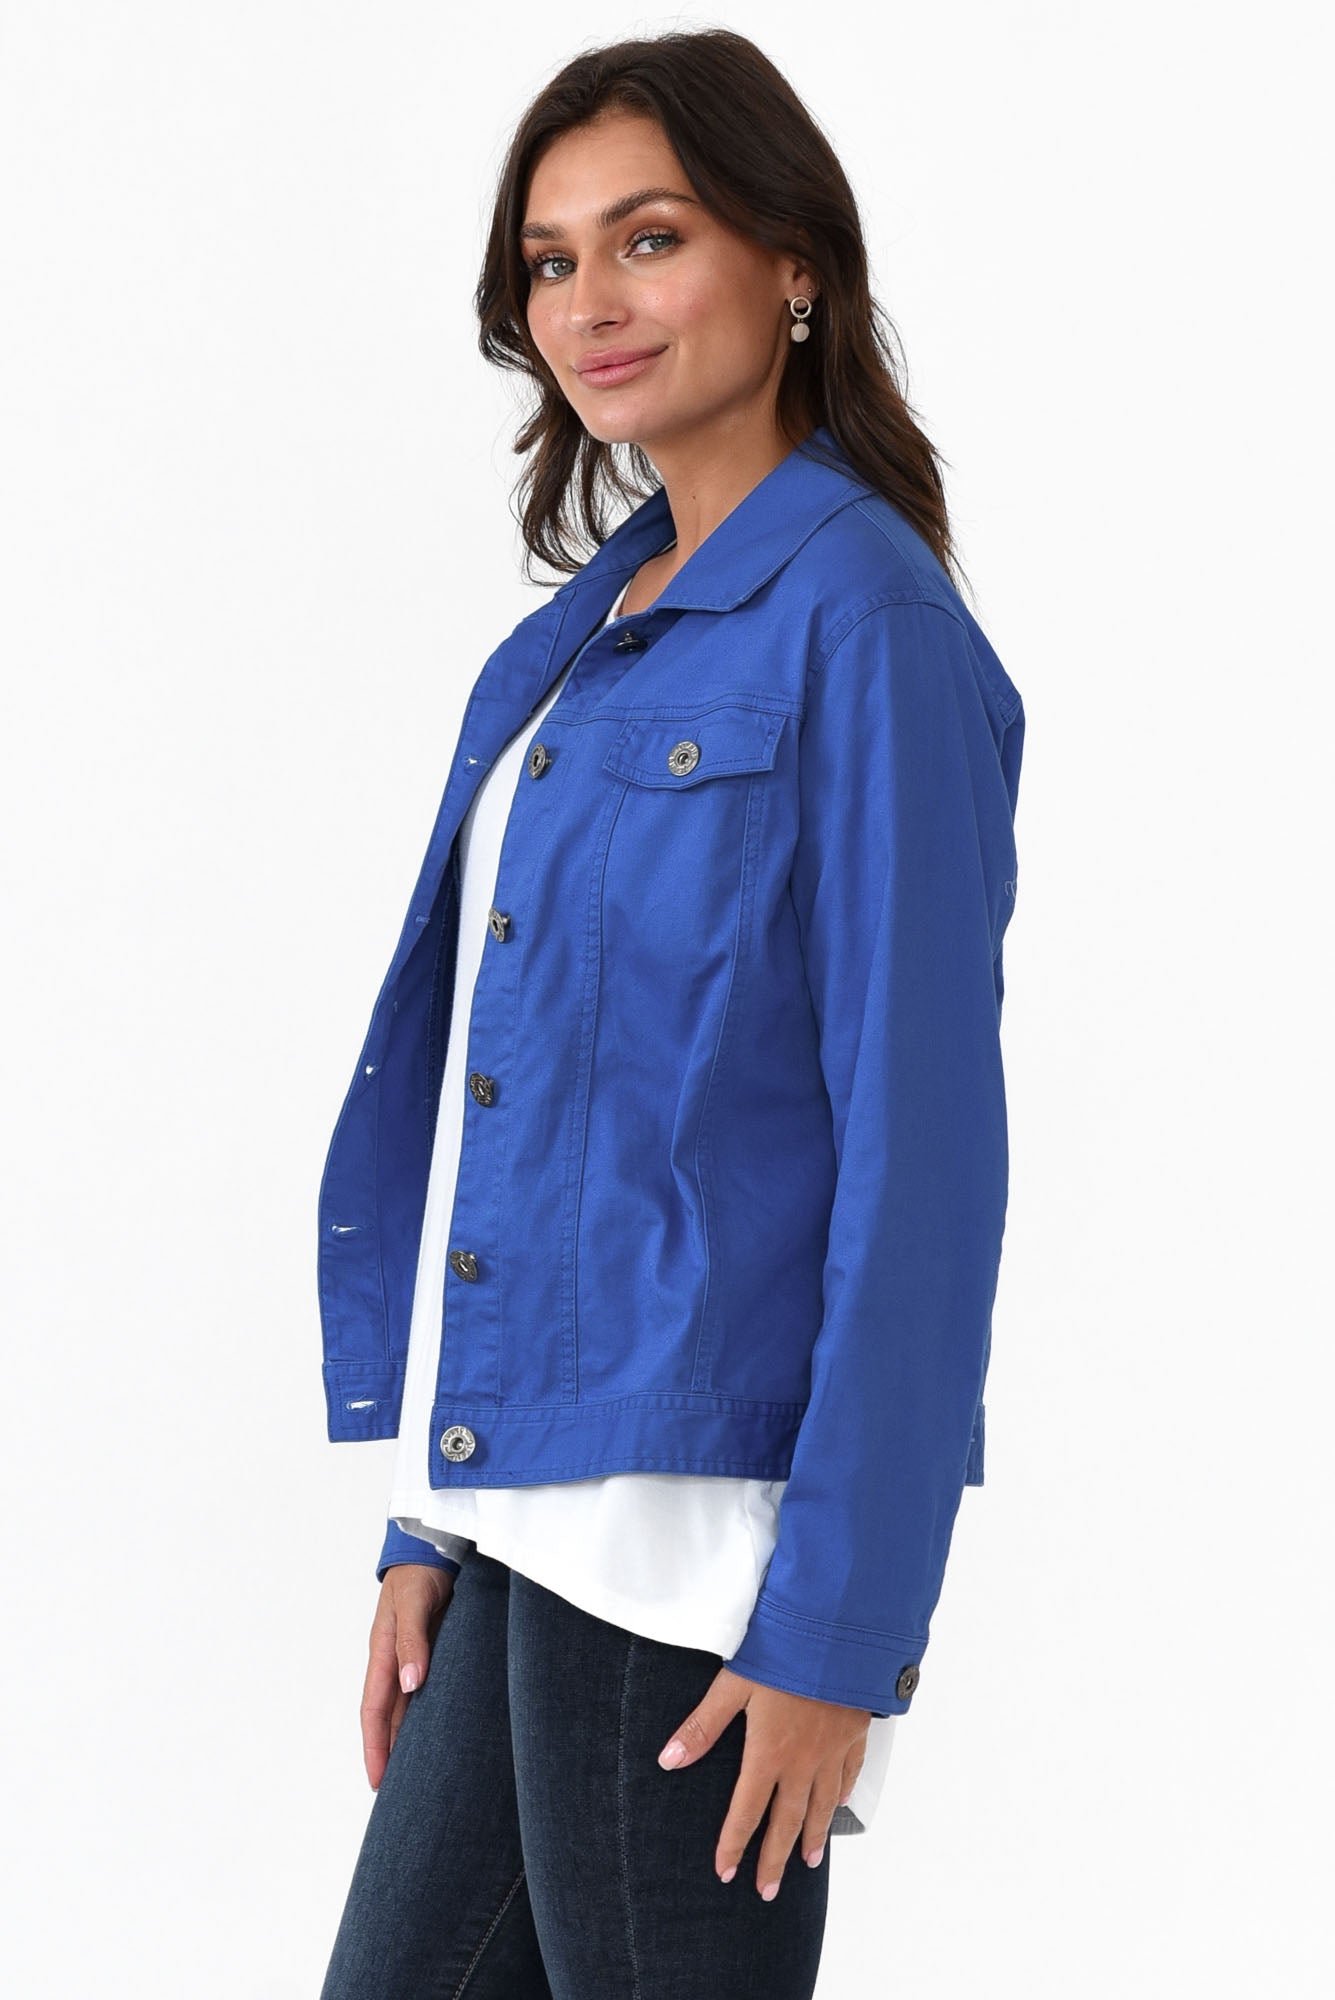 luvamia light jackets for women casual jackets women short jean jacket denim  long denim jackets womens winter jackets business casual clothes for women  Bright Cobalt Blue Size Small Fits Size 4 6